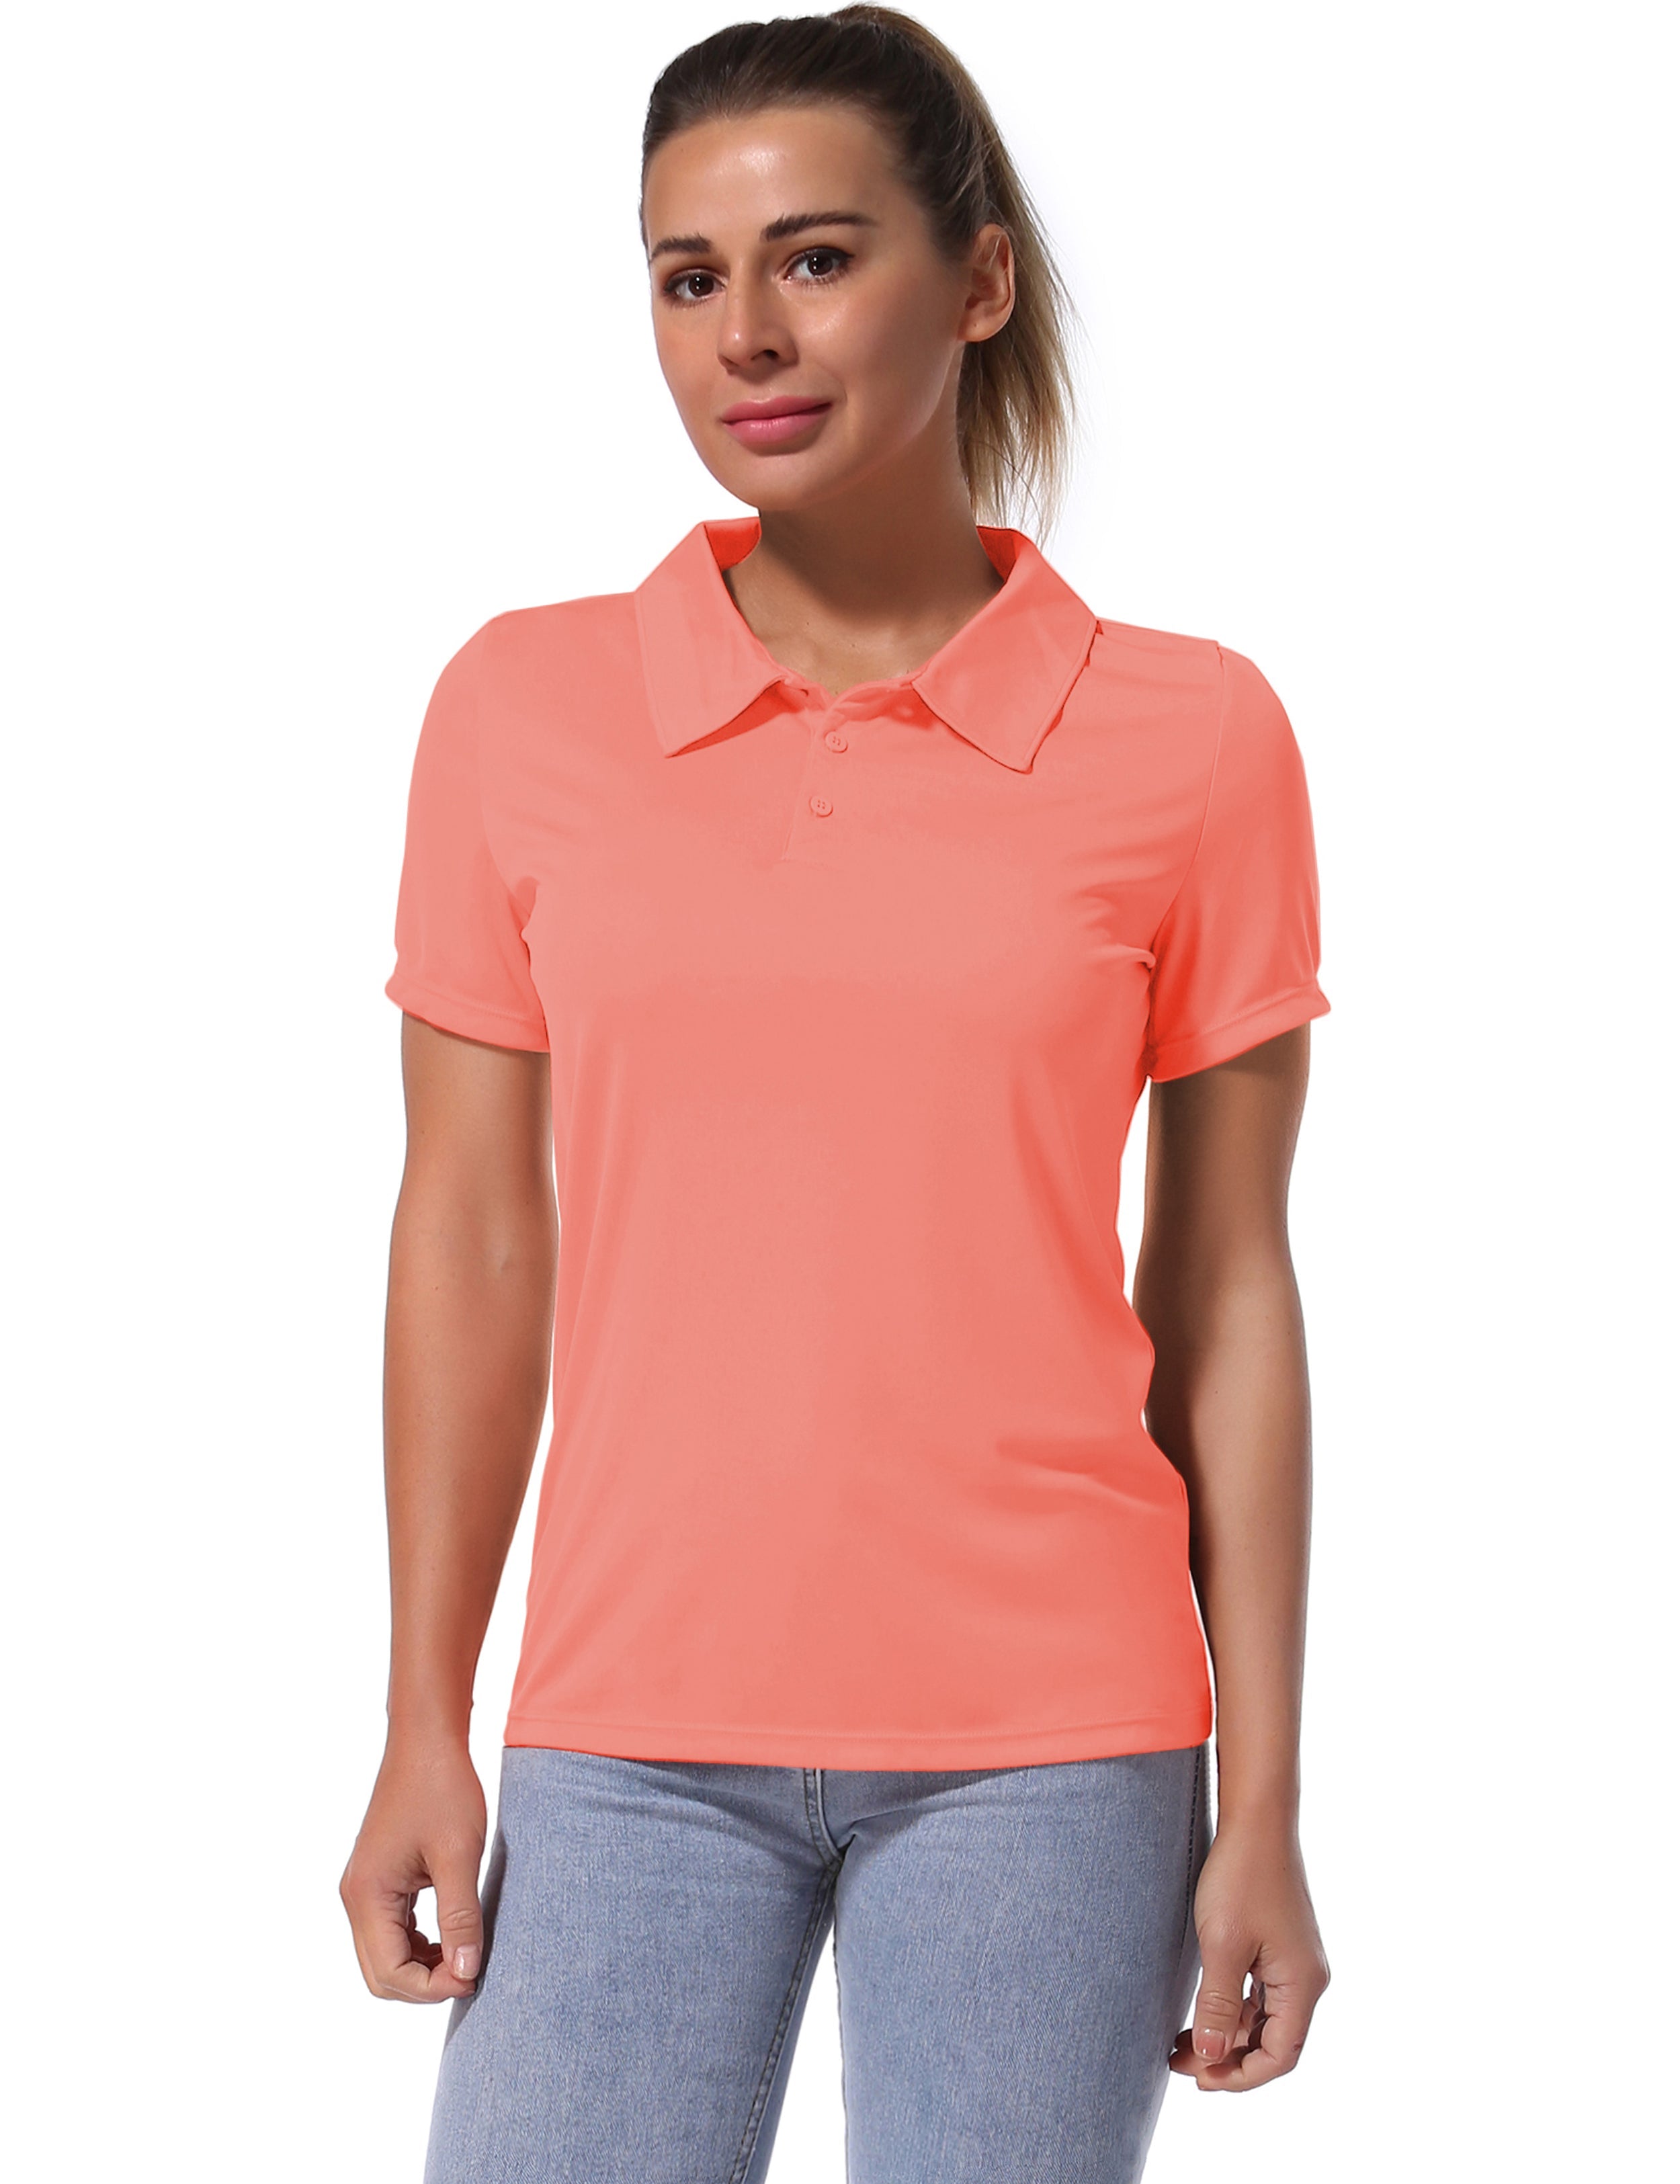 Short Sleeve Slim Fit Polo Shirt coral_Golf